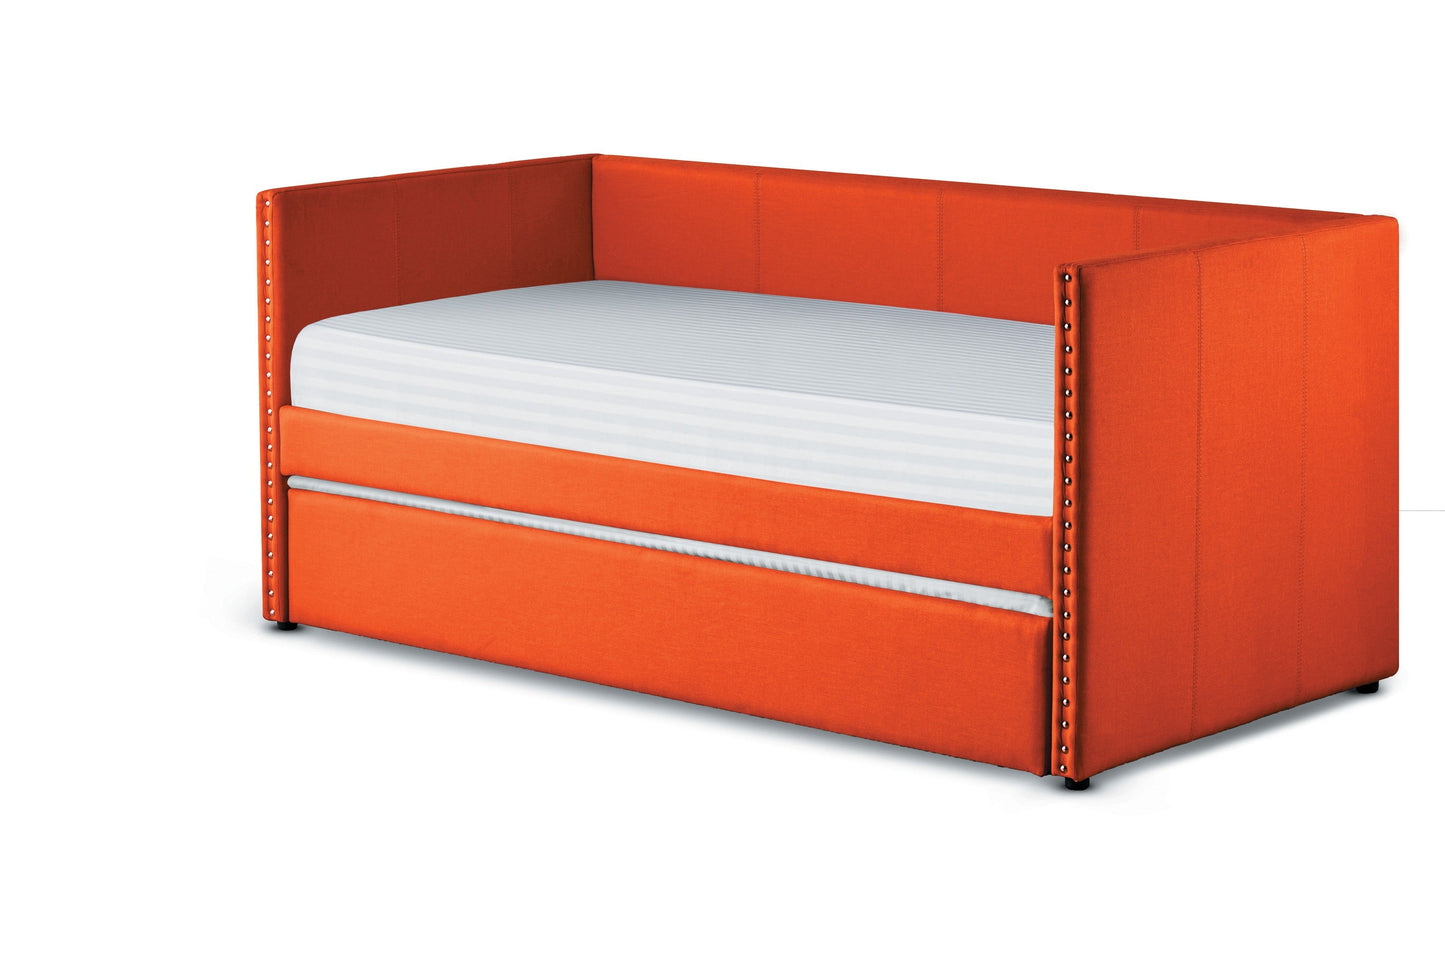 Therese Orange Daybed with Trundle